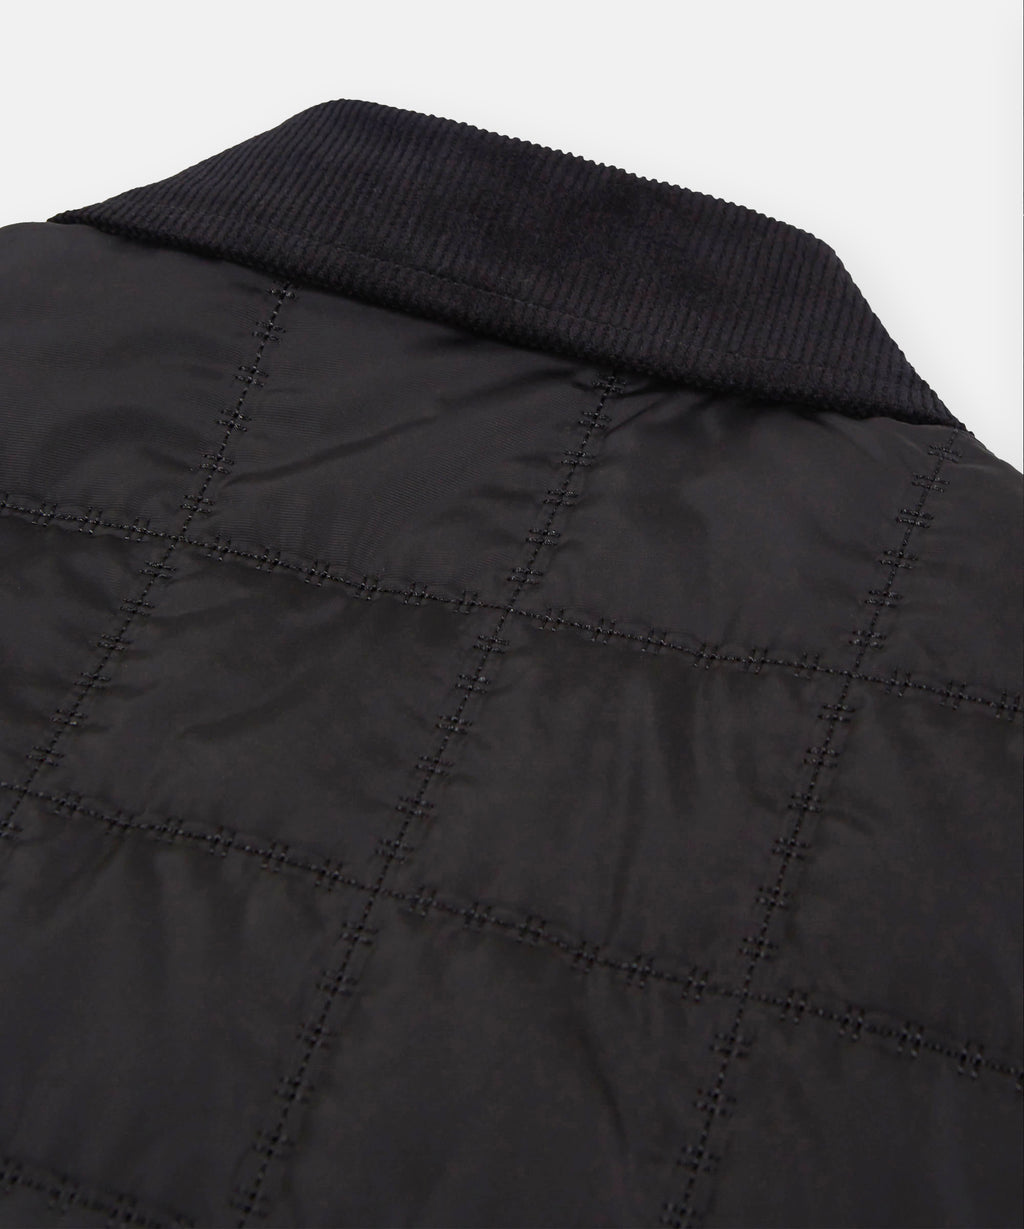  Quilting detail on Paper Planes Quilted Shirt Jacket, color Black.